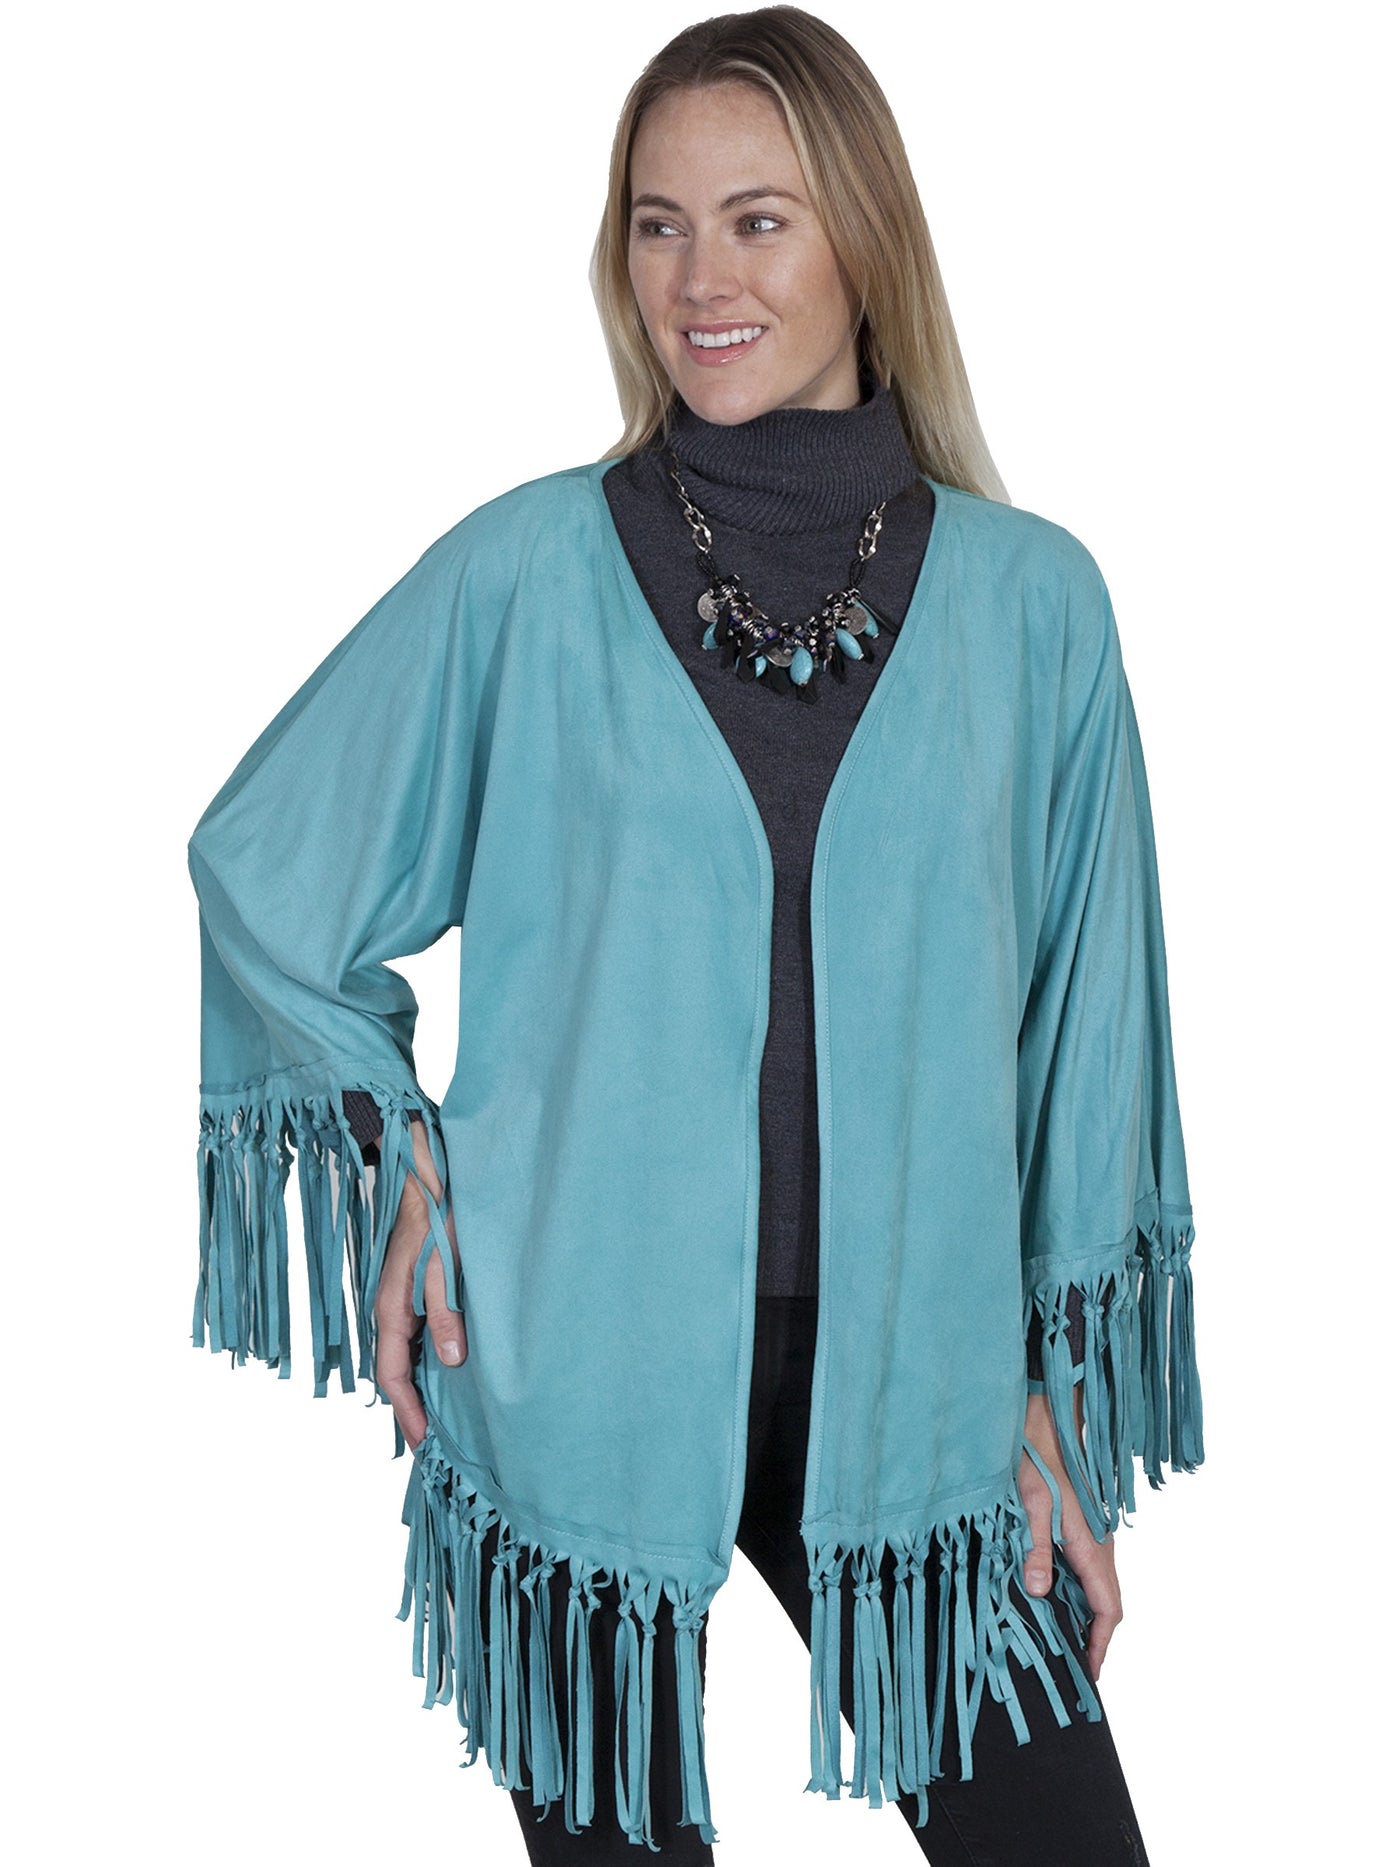 Old West Fringe Wrap in Turquoise - SOLD OUT